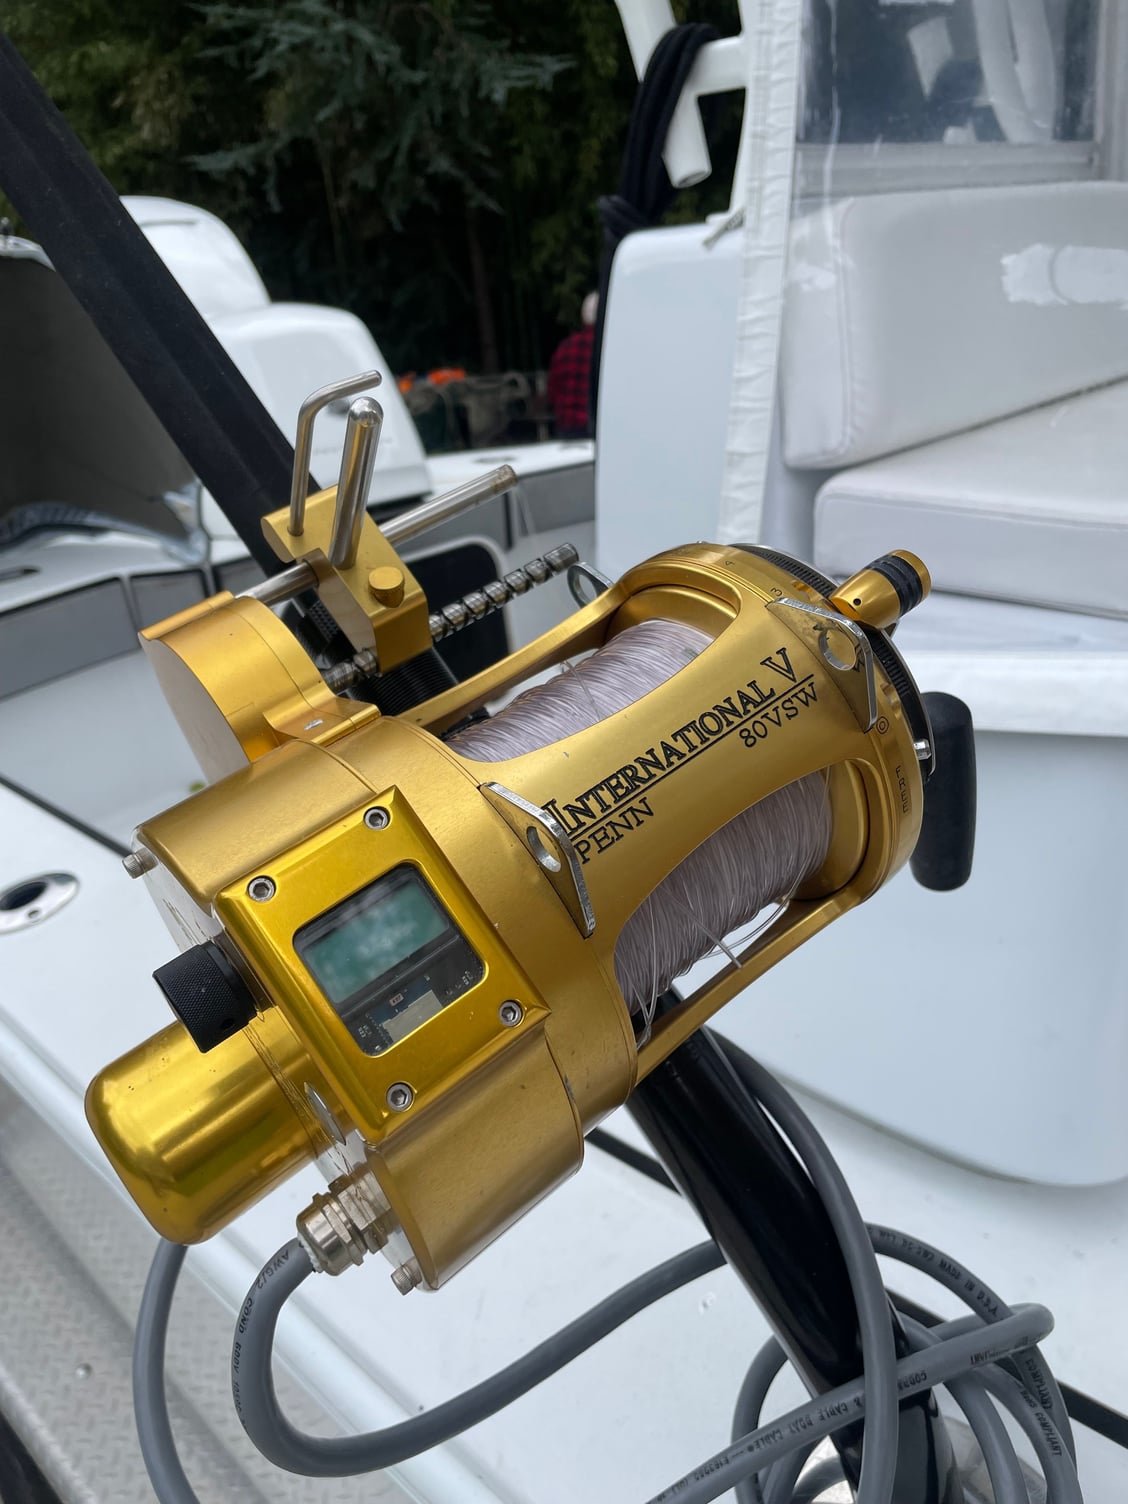 Hooker electric penn80w - The Hull Truth - Boating and Fishing Forum